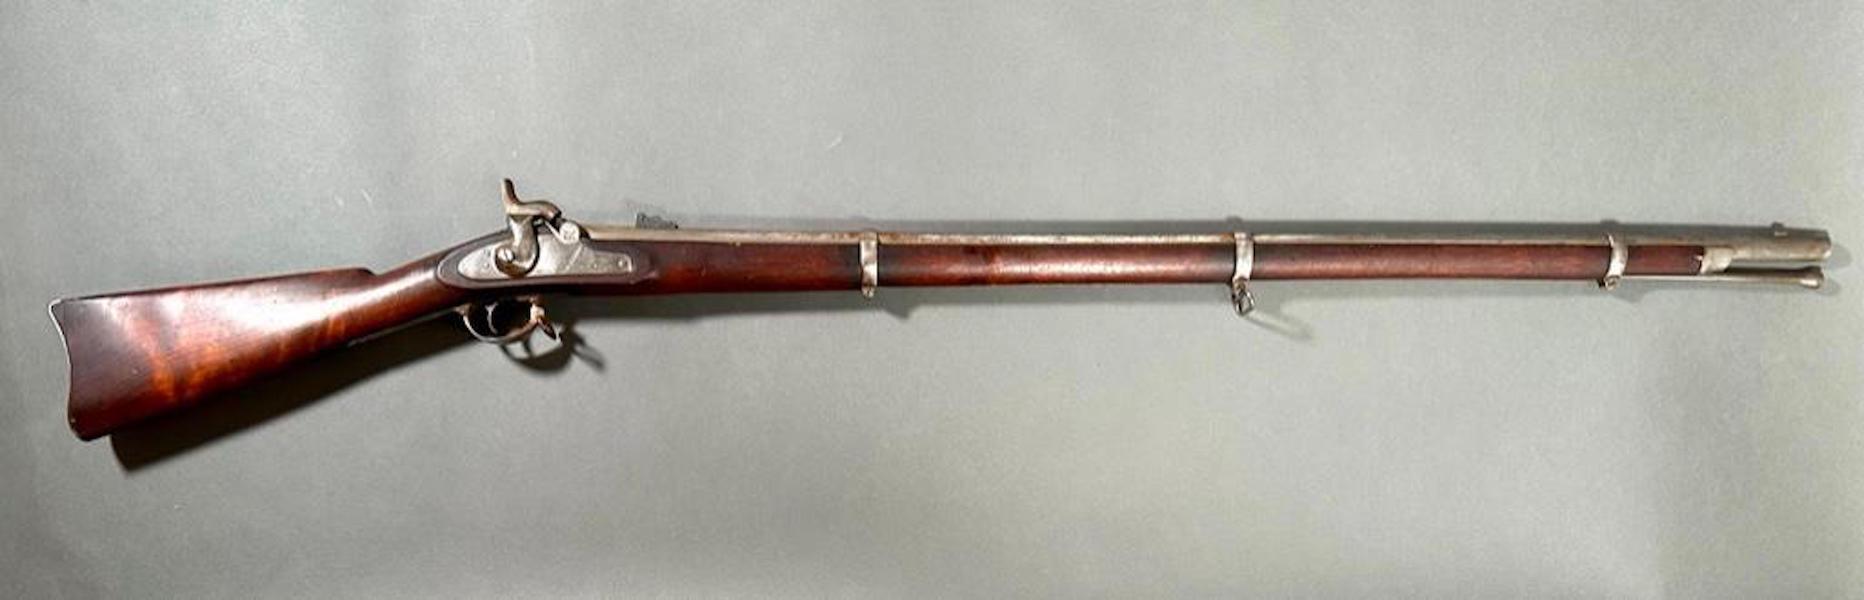 1863 Colt Civil War contract rifle musket, estimated at $2,000-$3,000